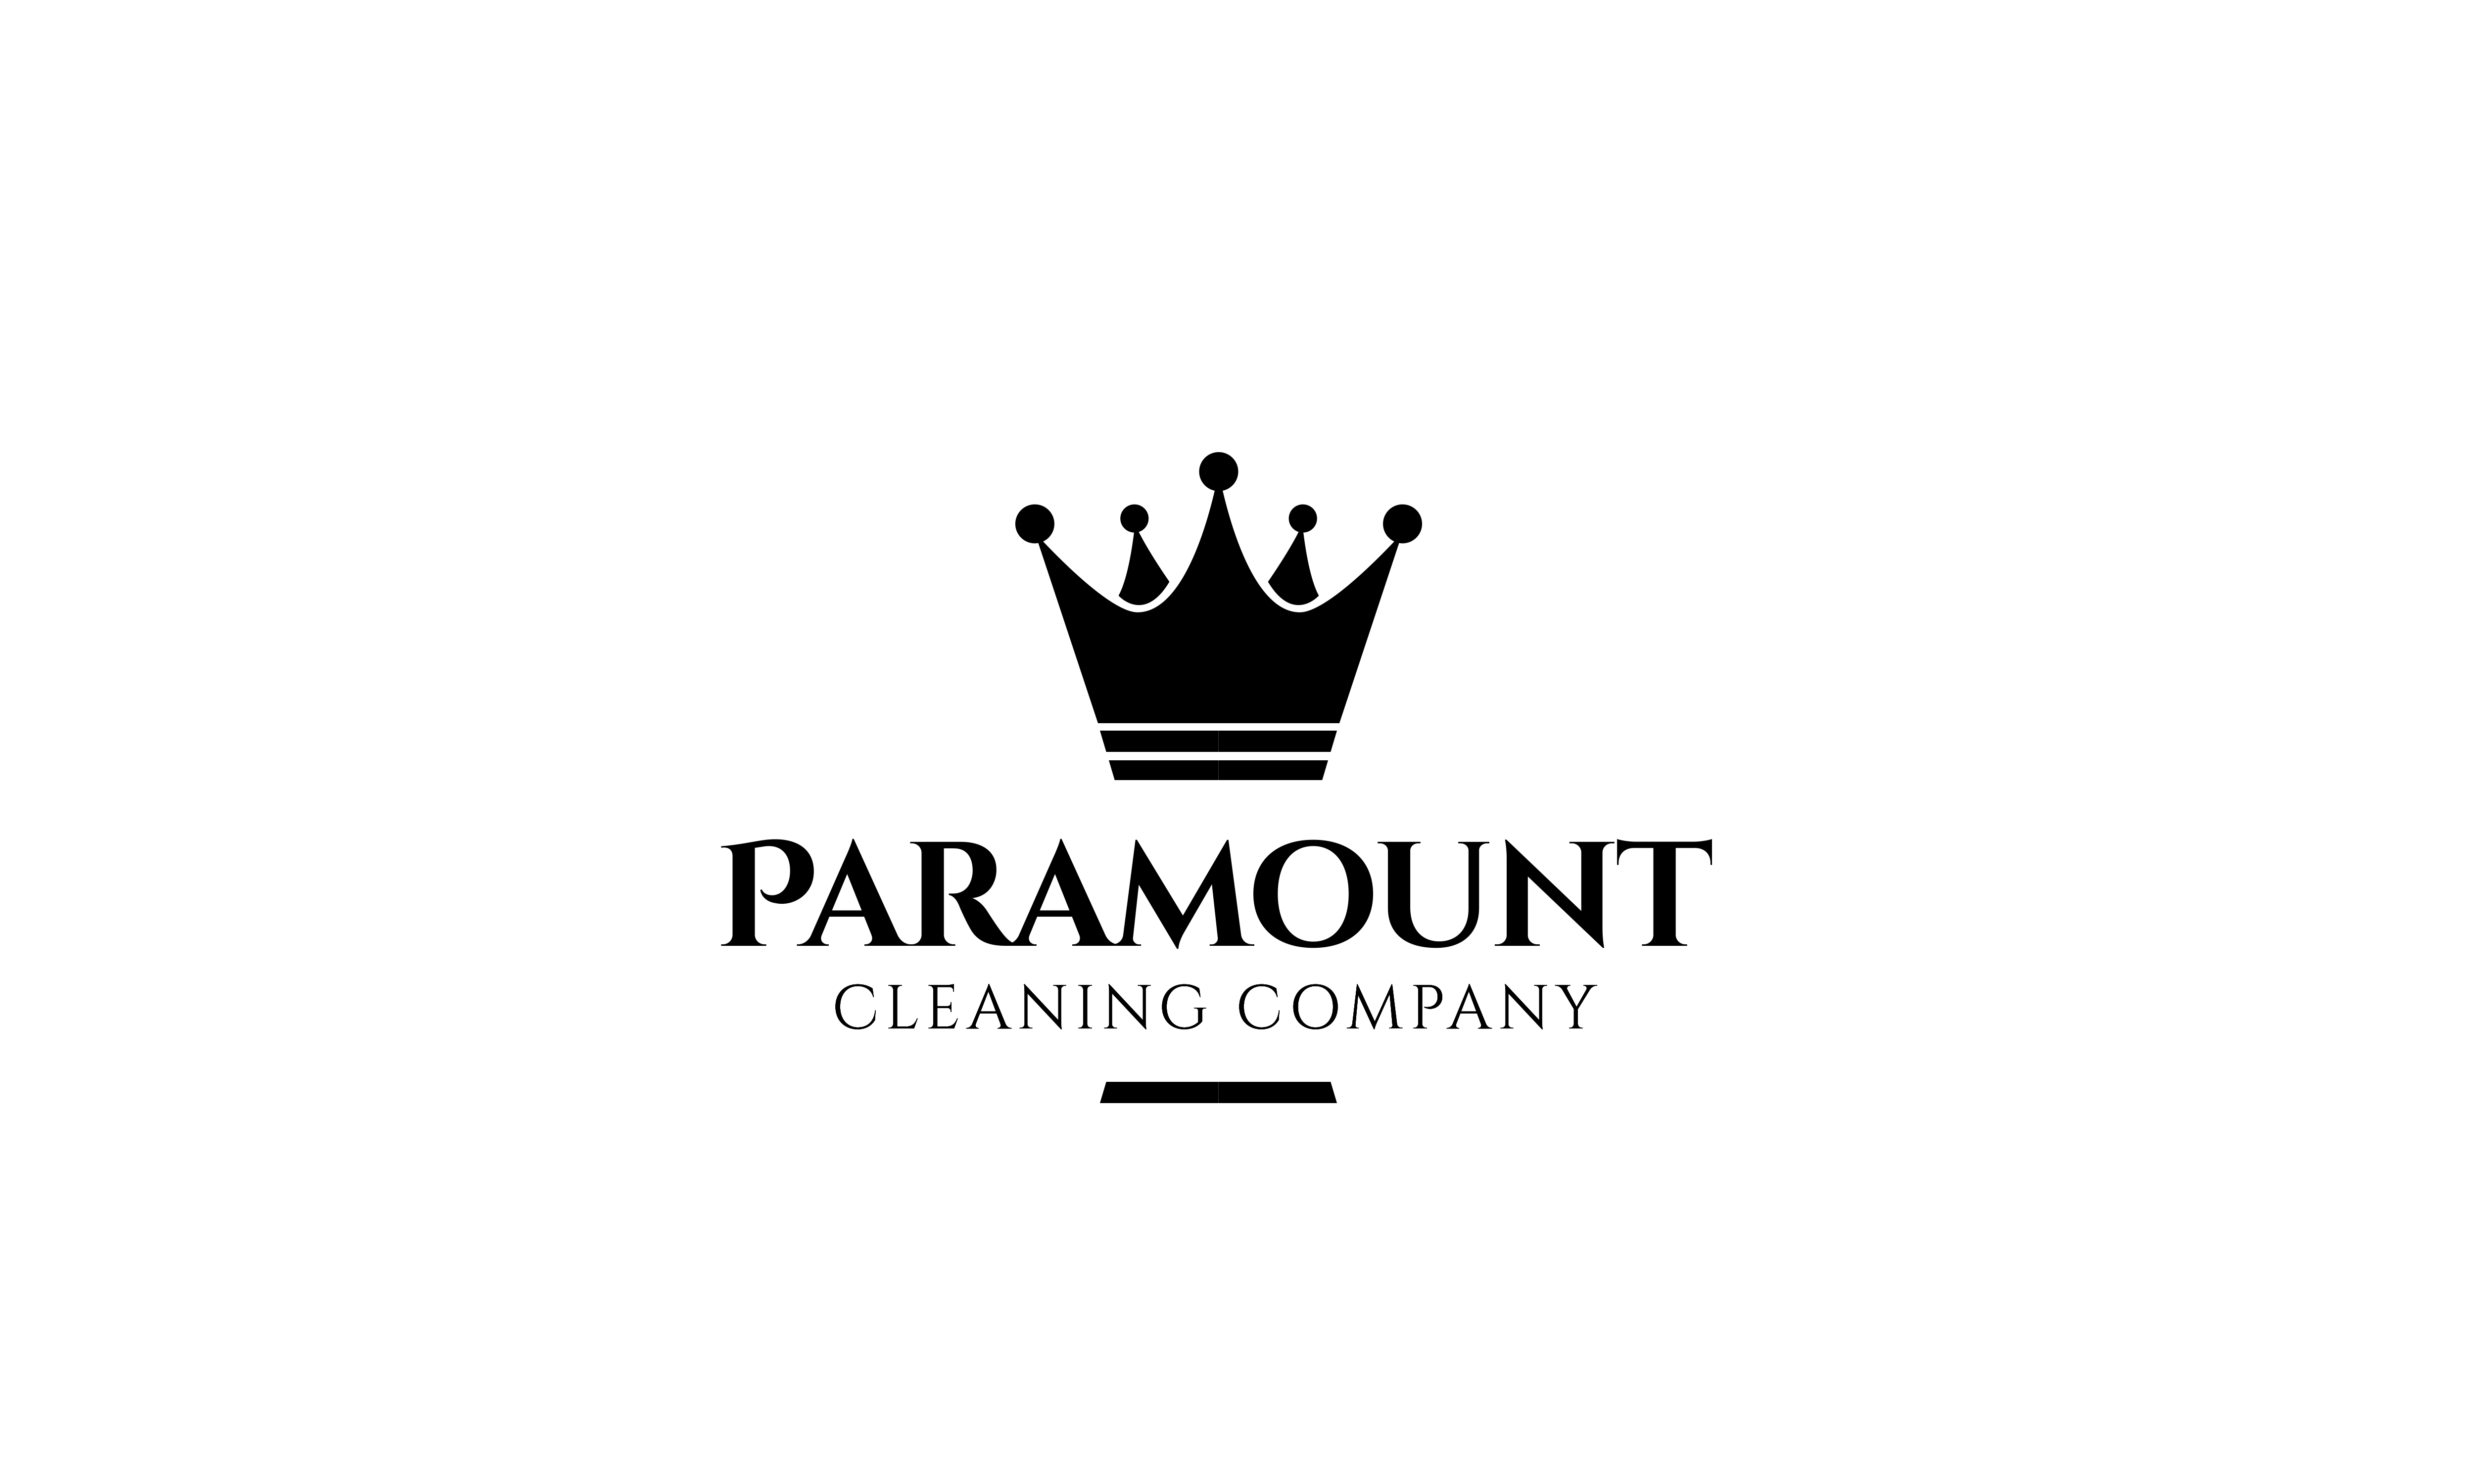 Logo of Paramount Cleaning Company